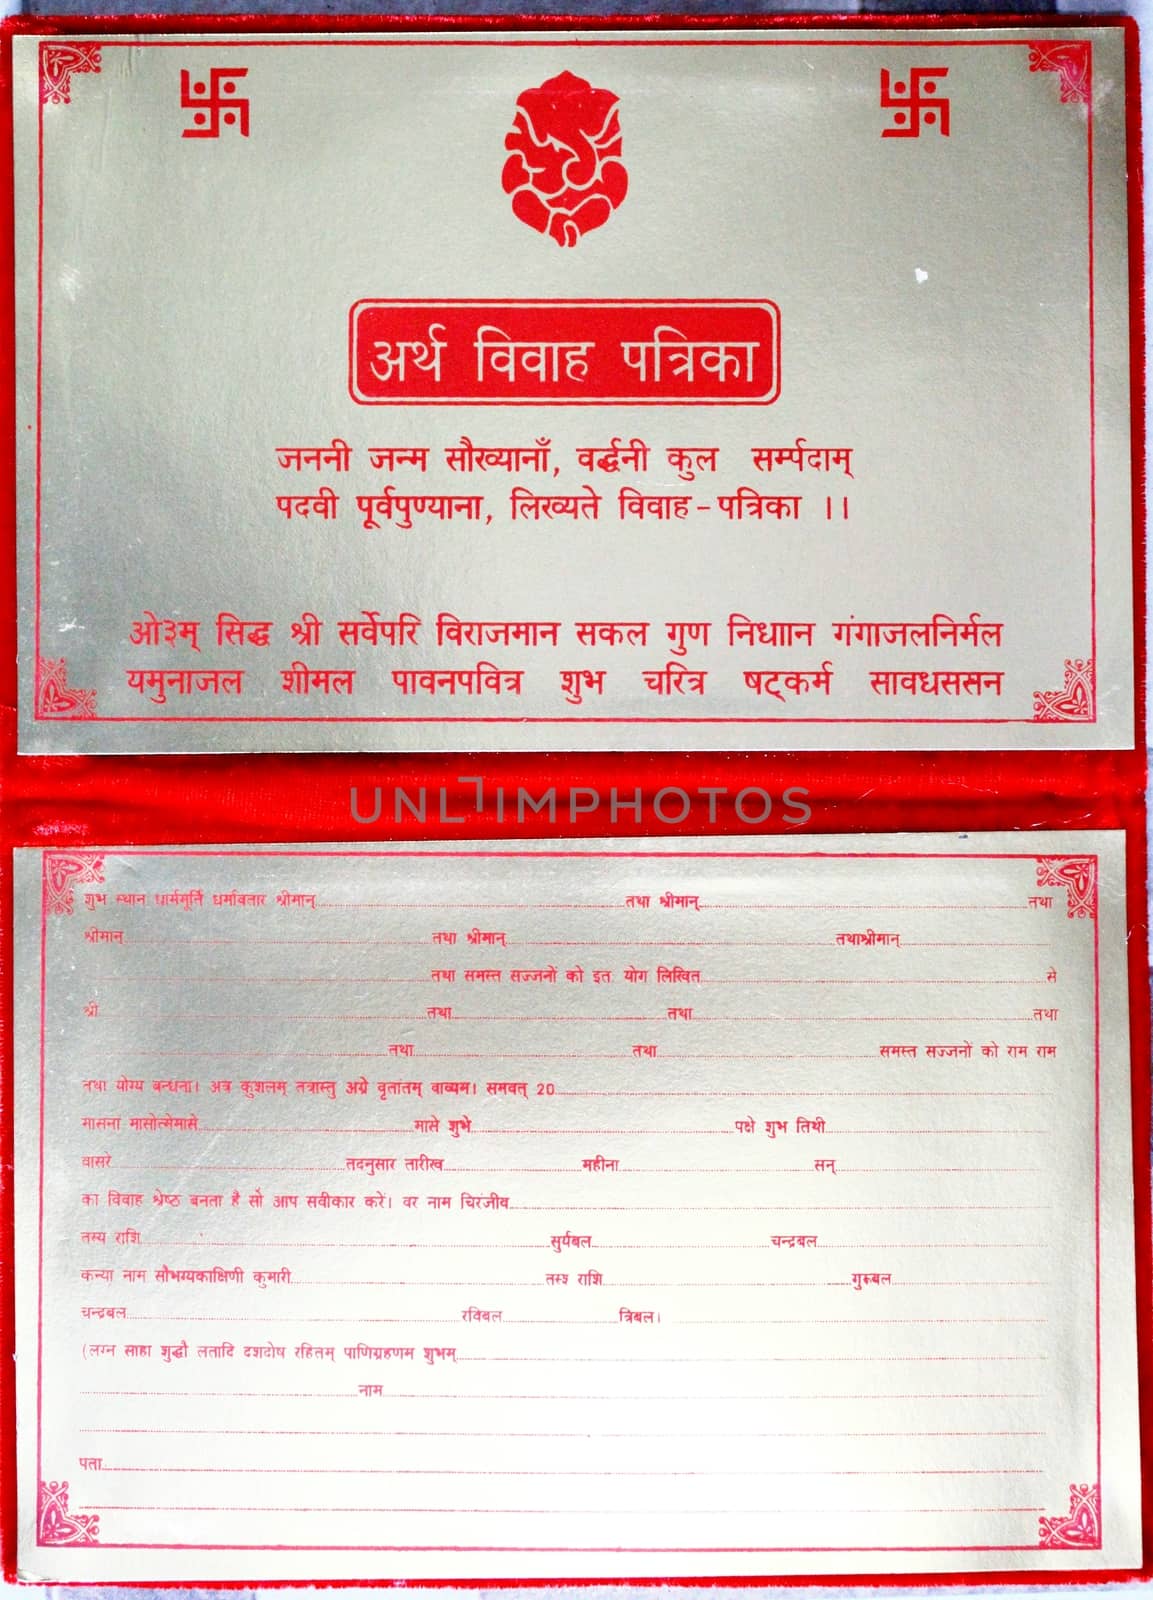 marriage card used for indian families by KUL-WIN